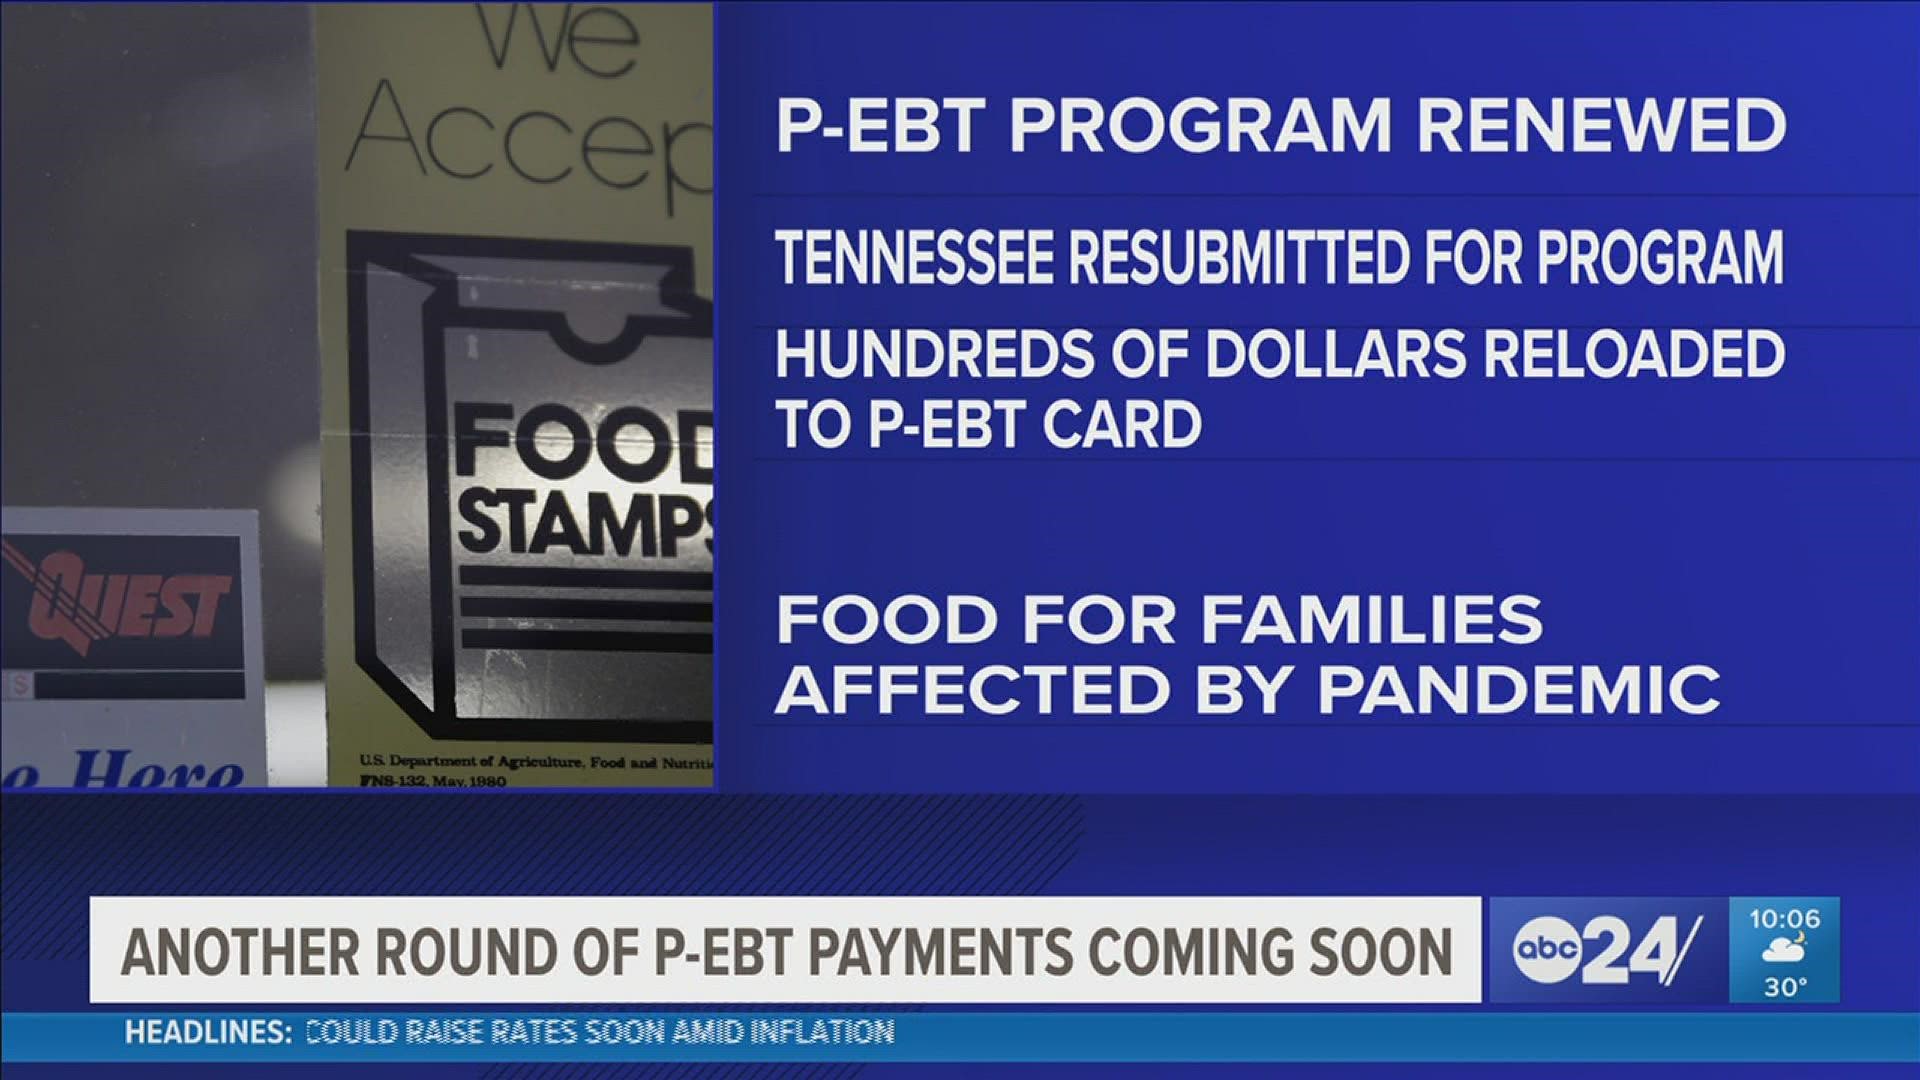 Tennessee said they will be participating in the P-EBT program for the 2021-2022 school year